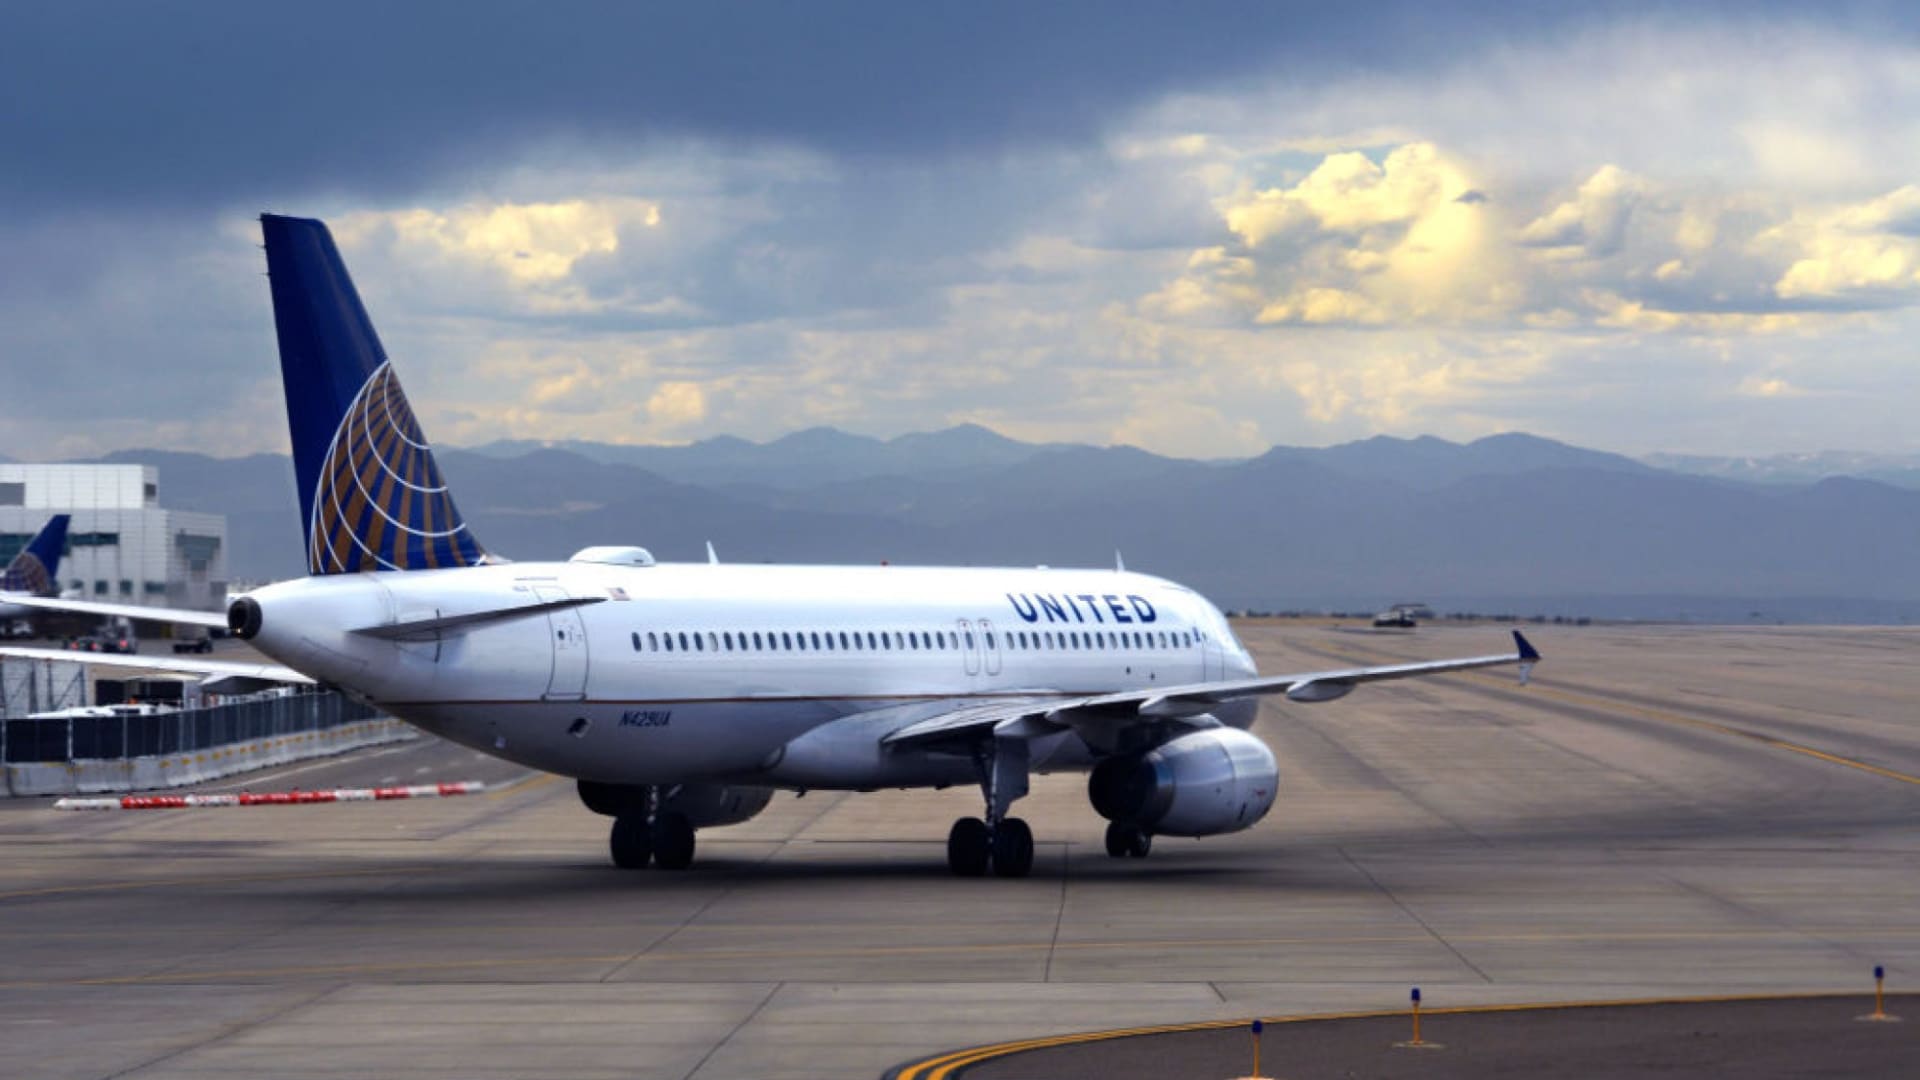 United Airlines Is Giving Away a Year of Free Flights. There's Only 1 Catch